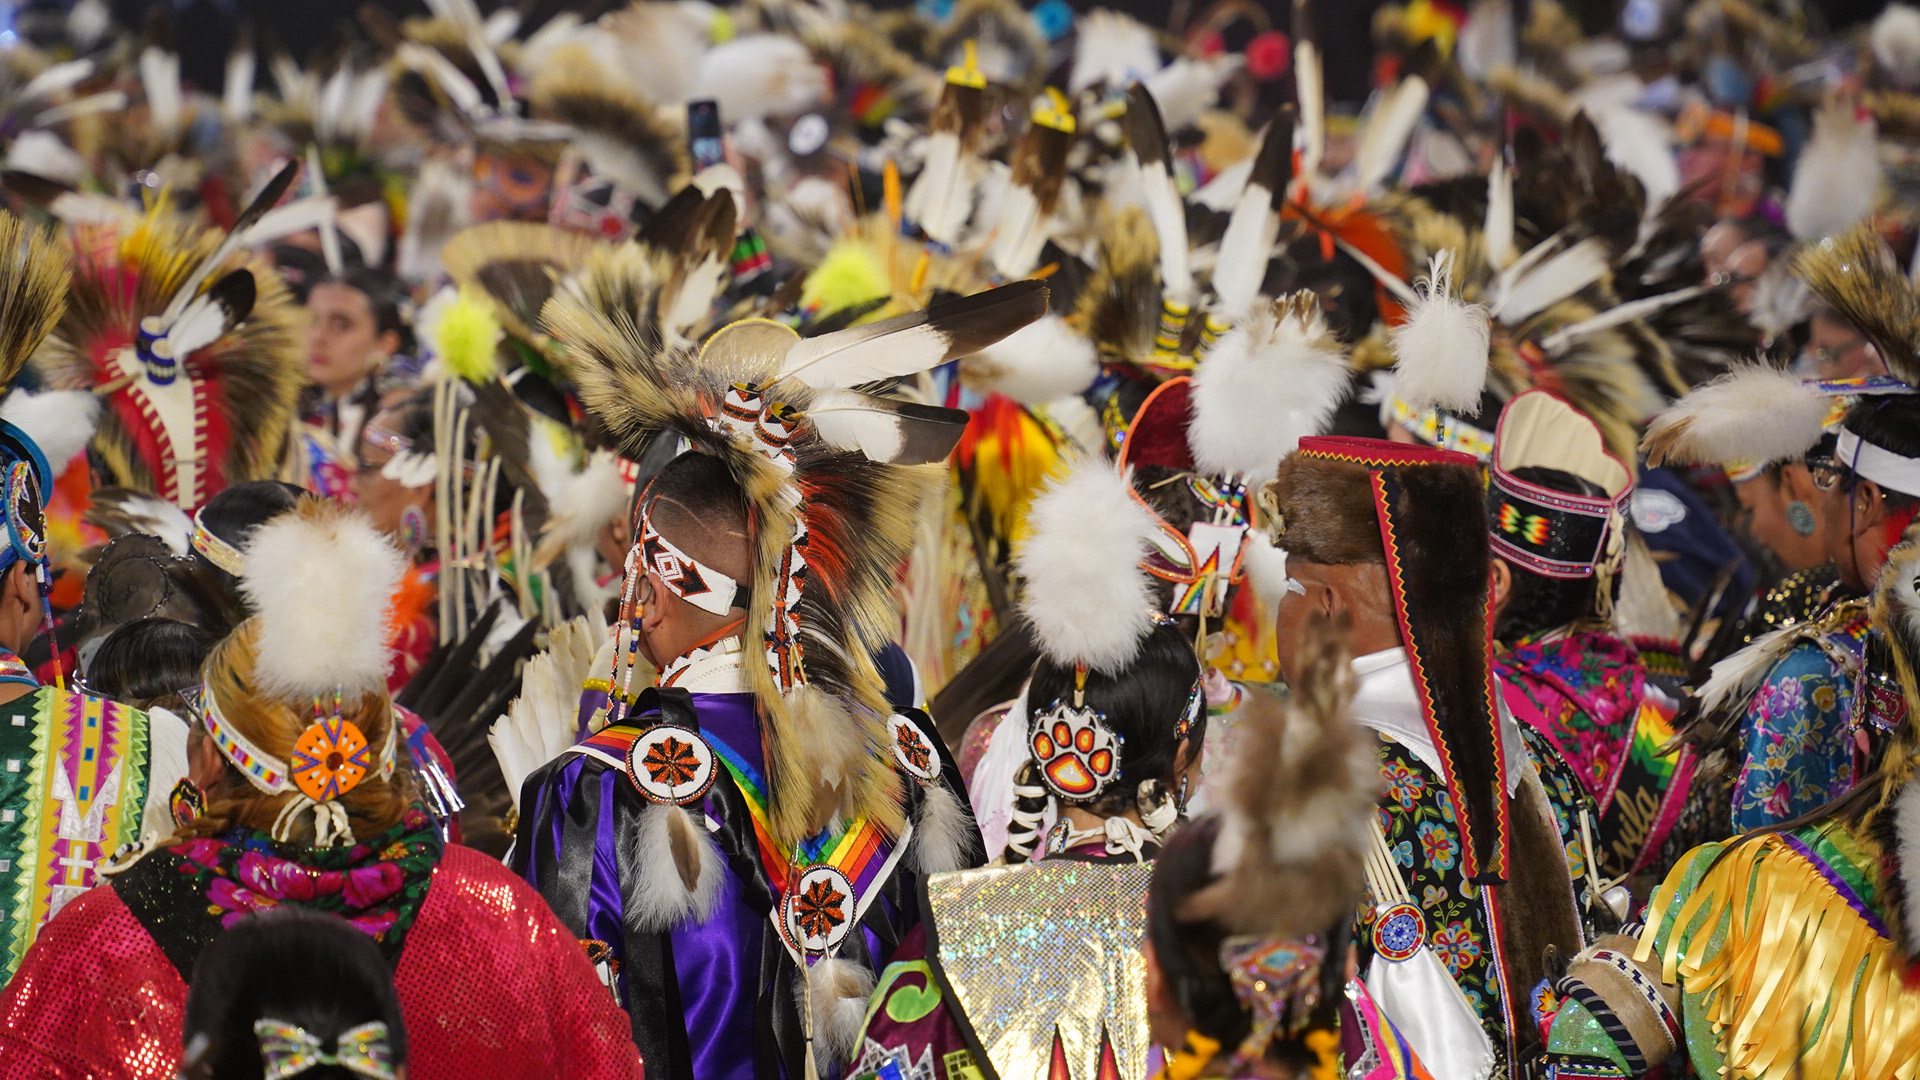 Tens of thousands attend Gathering of Nations in New Mexico, world's